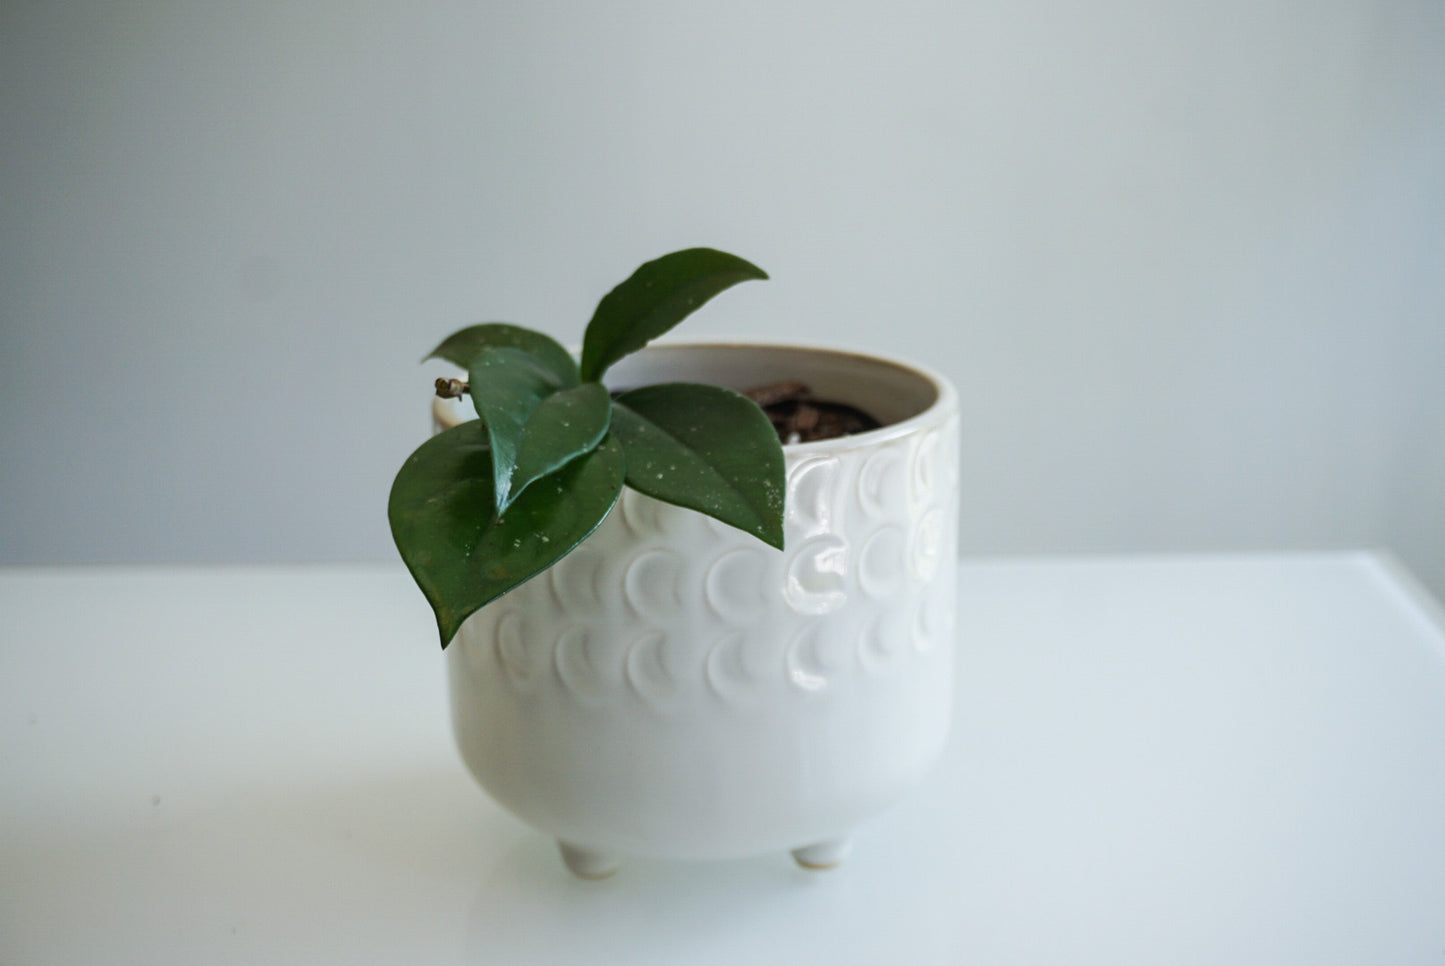 Ivory Moon Phase Footed Planter - 4.75" & 6"